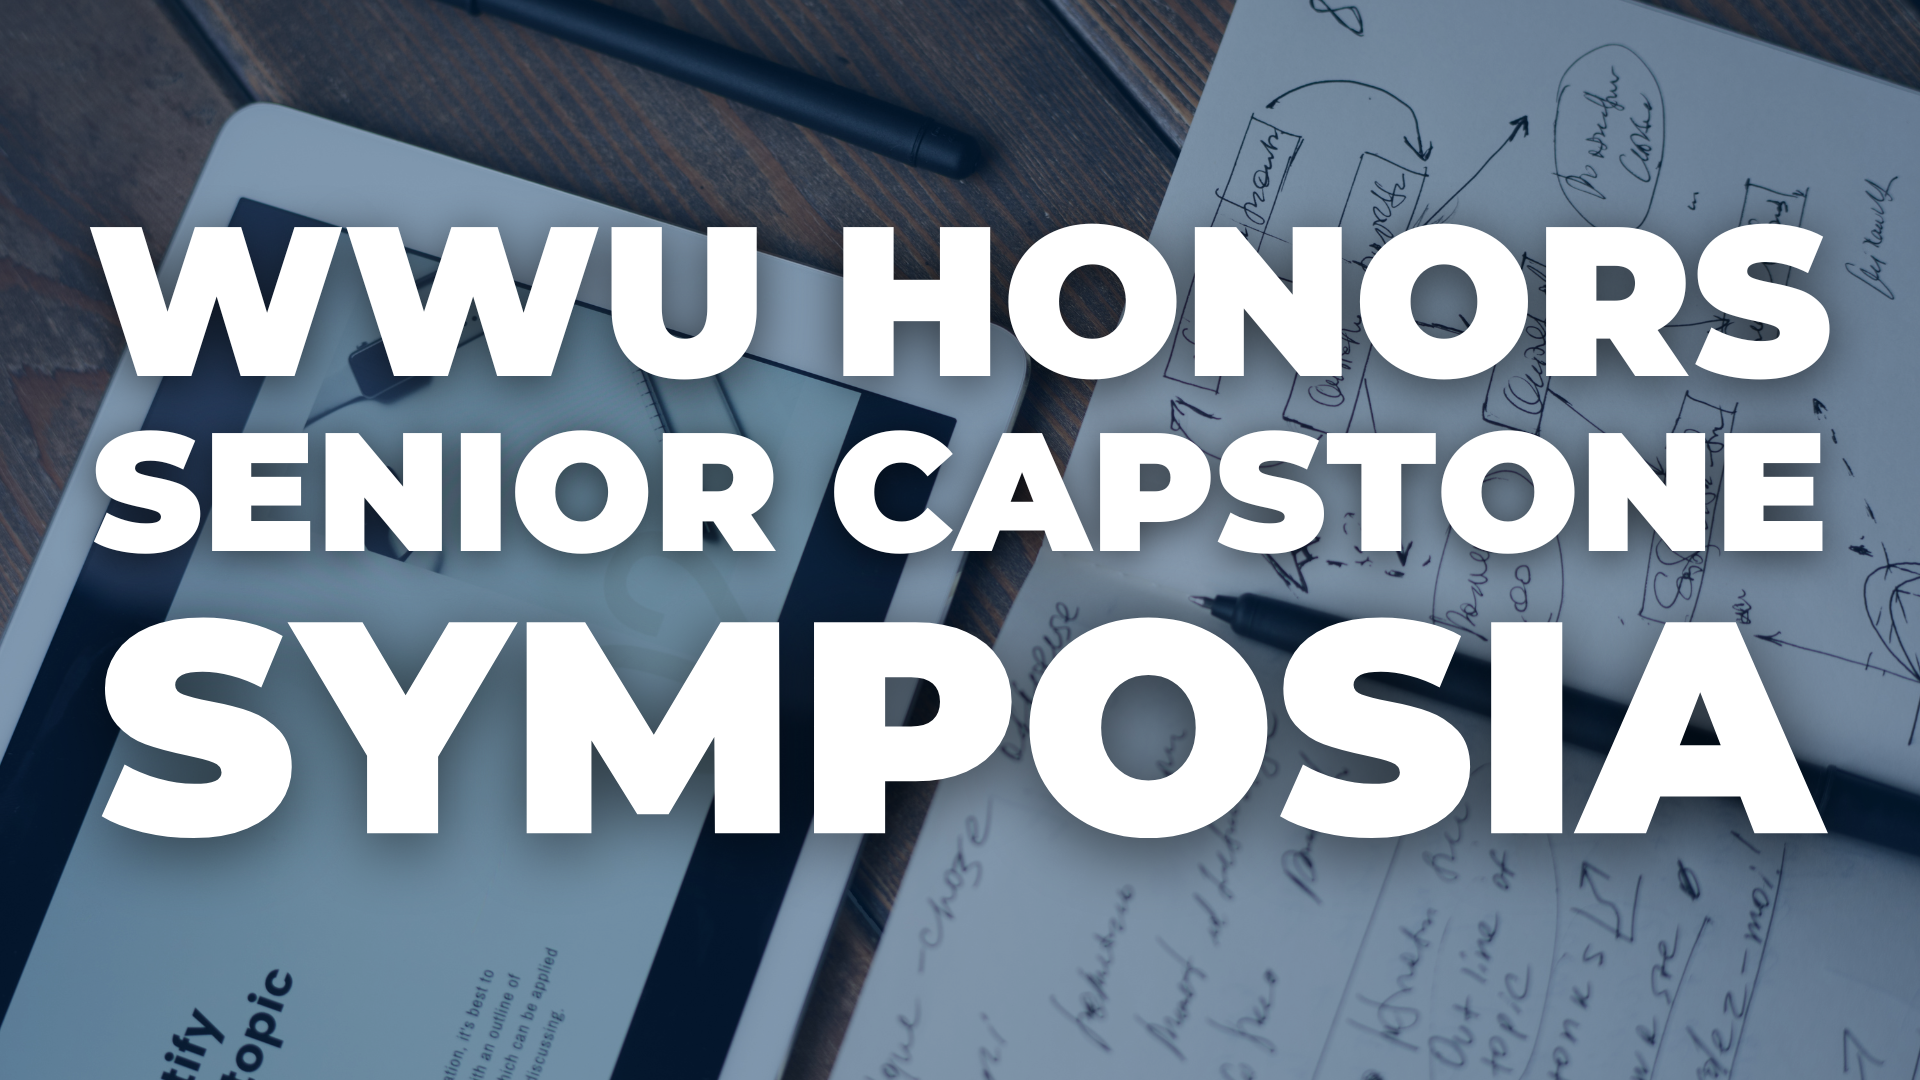 A blue filter over a photo of a tablet with a presentation displayed on the screen with a notebook and pens. Text reads "WWU Honors Senior Capstone Symposia".